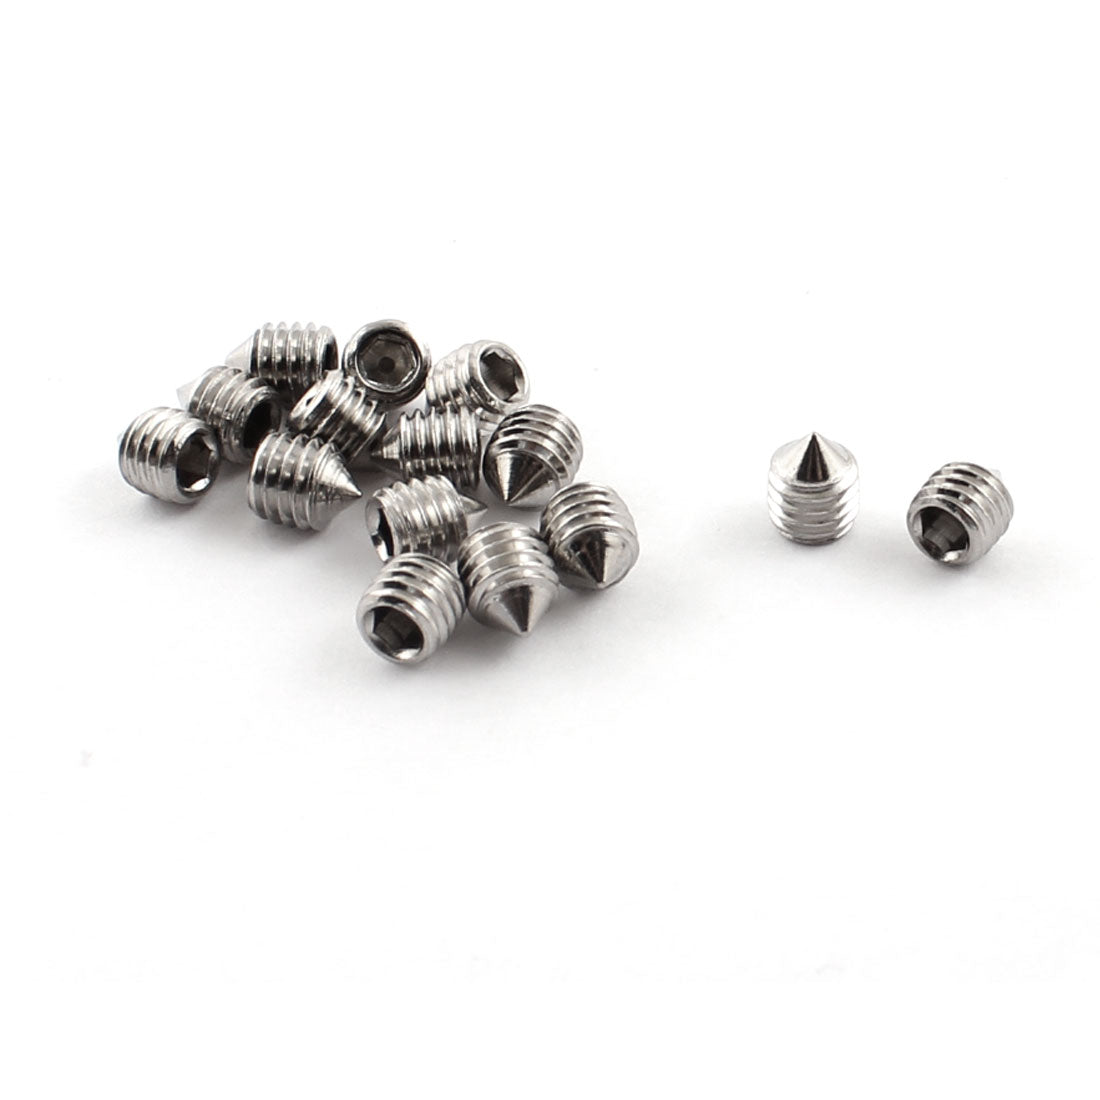 uxcell Uxcell 15pcs M5 x 6mm 304 Stainless Steel Hex Socket Cone Point Grub Screw